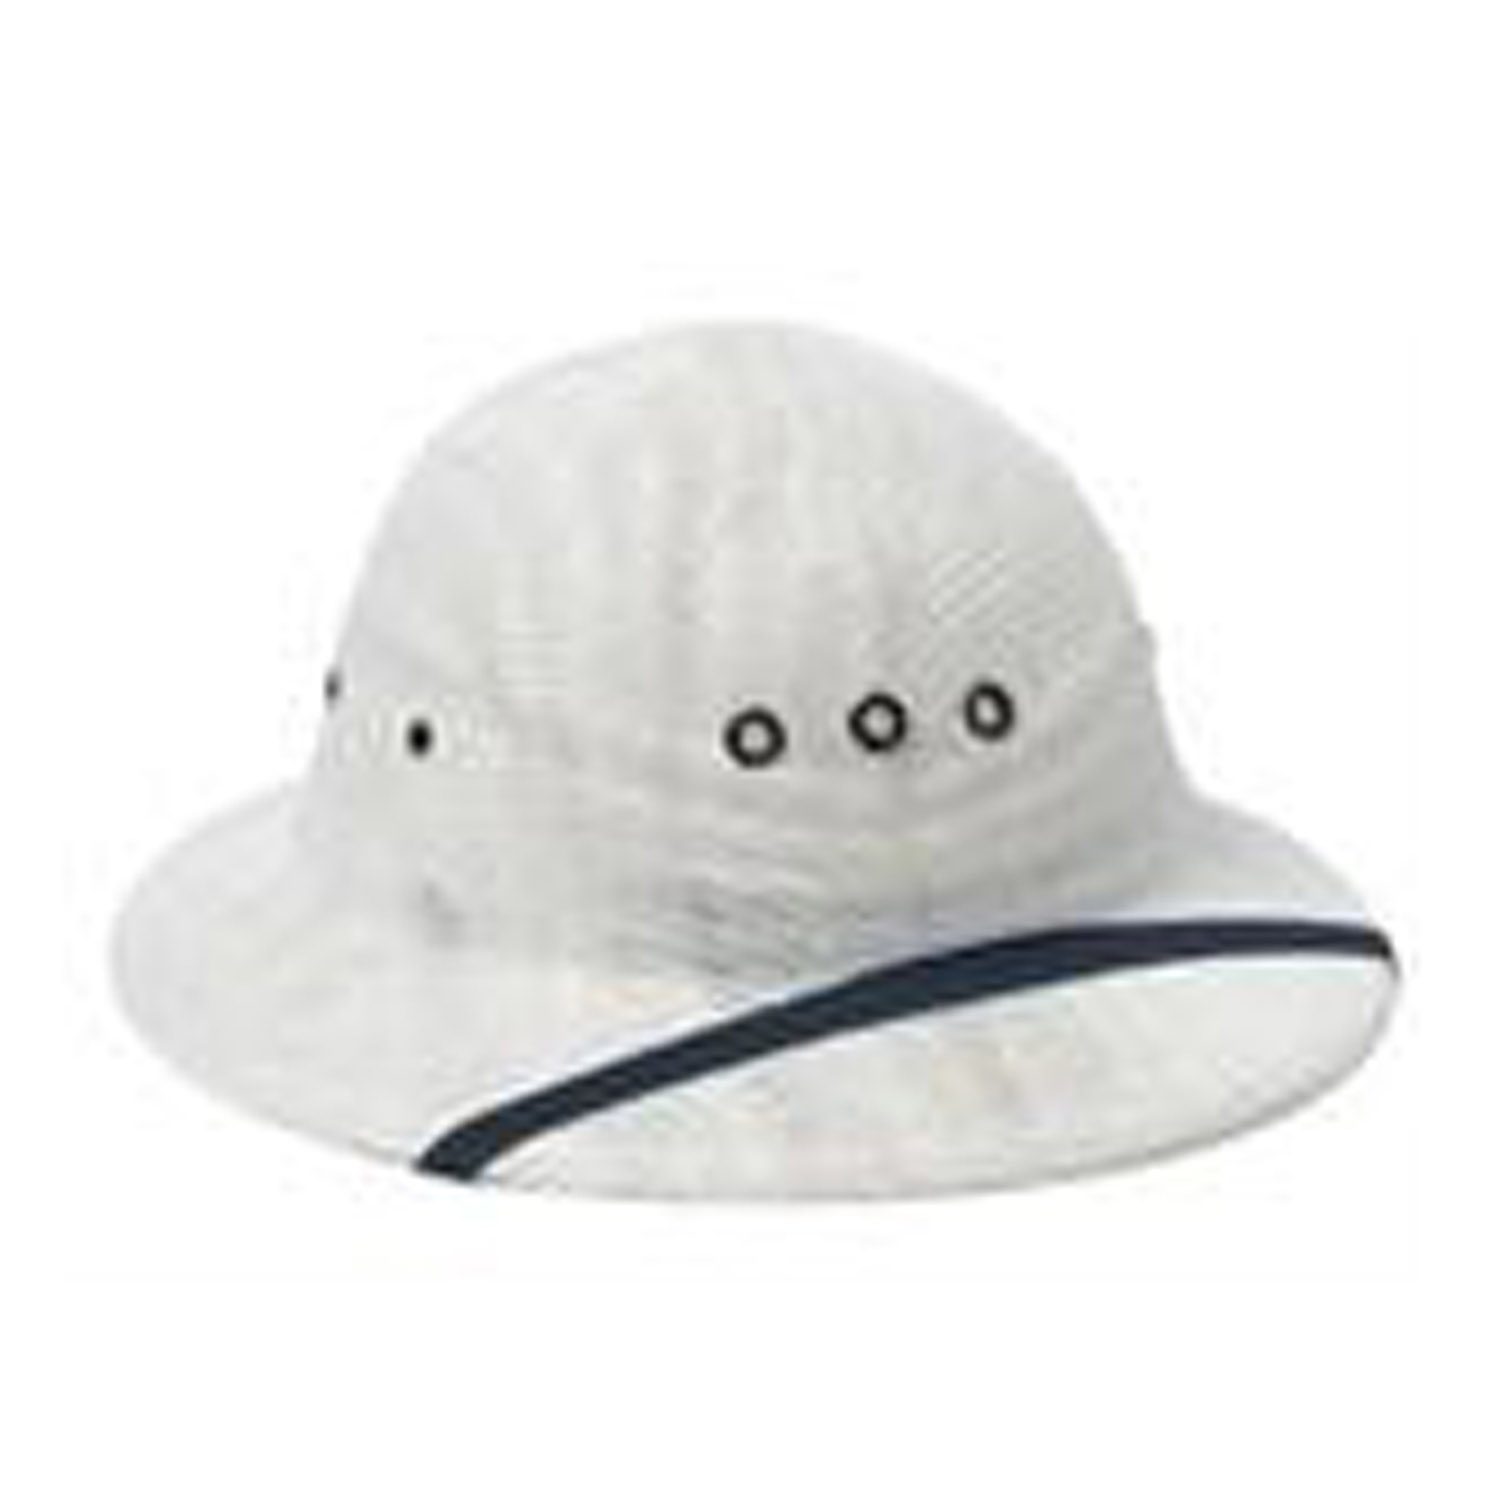 Sun Helmet with Woven Mesh for Letter Carriers and Motor Veh